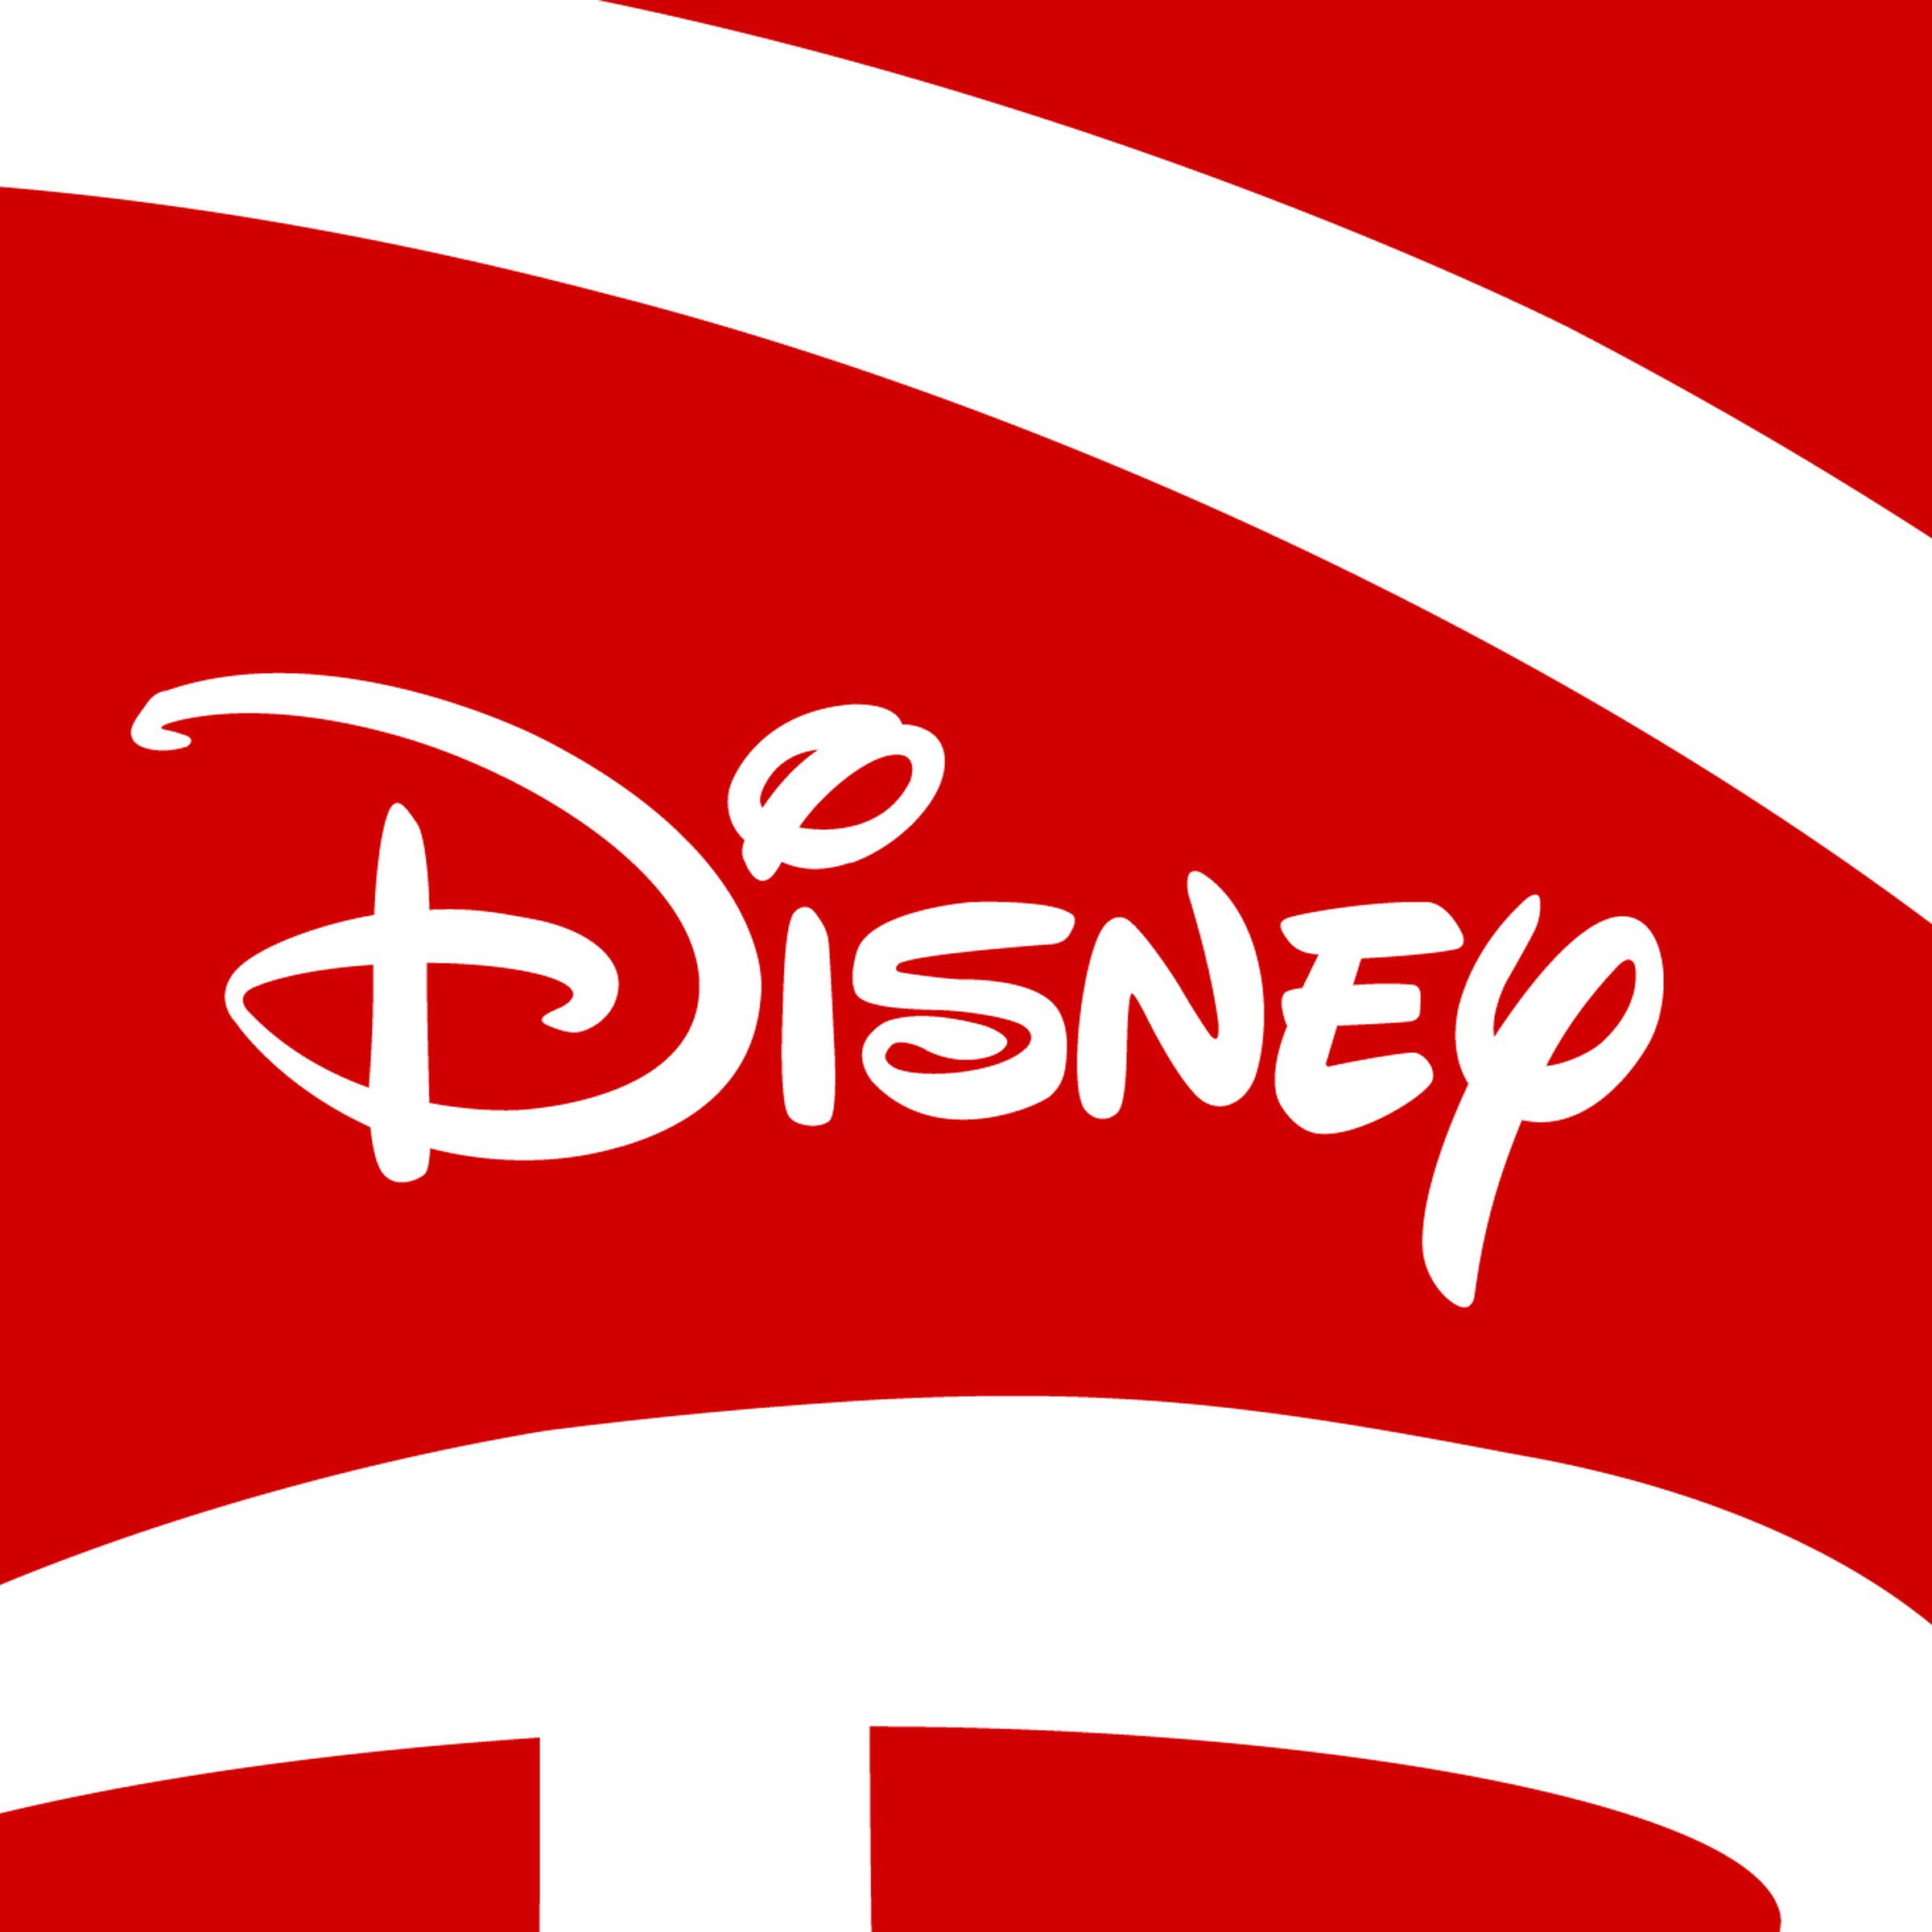 The Disney script logo inside a larger, cropped Disney “D” on a red background. The letters are white.